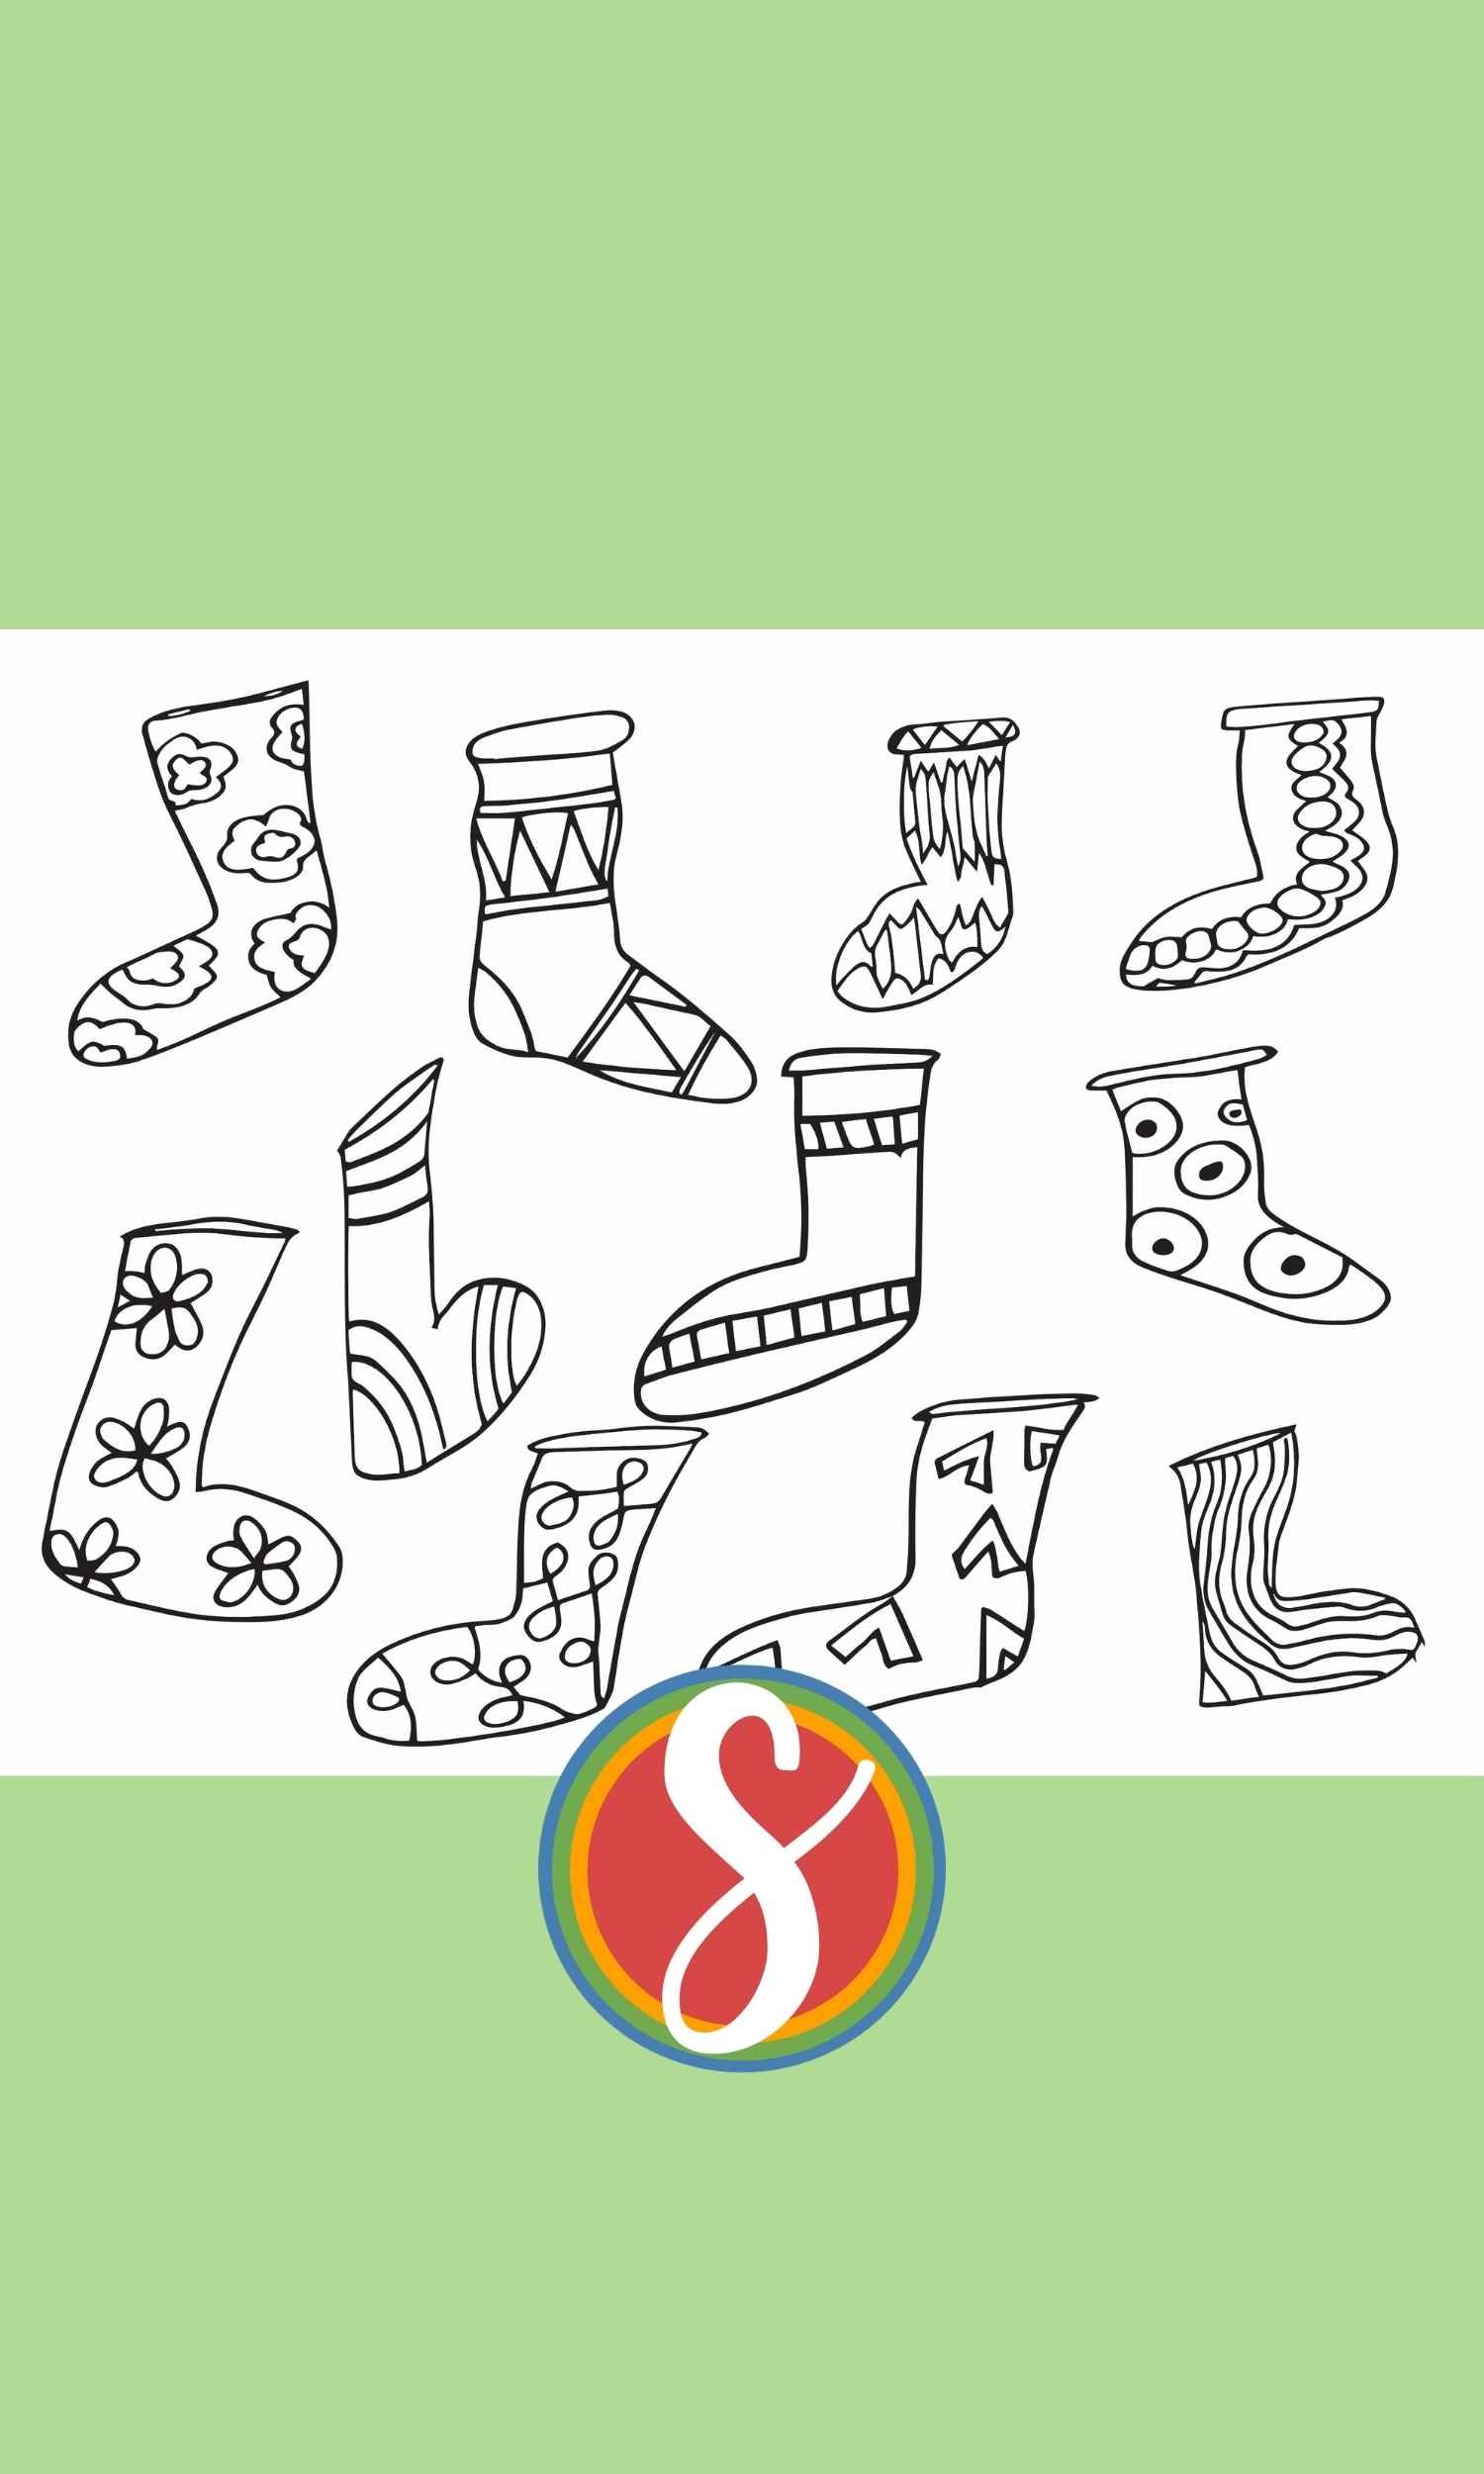 Free silly socks coloring page â stevie doodles